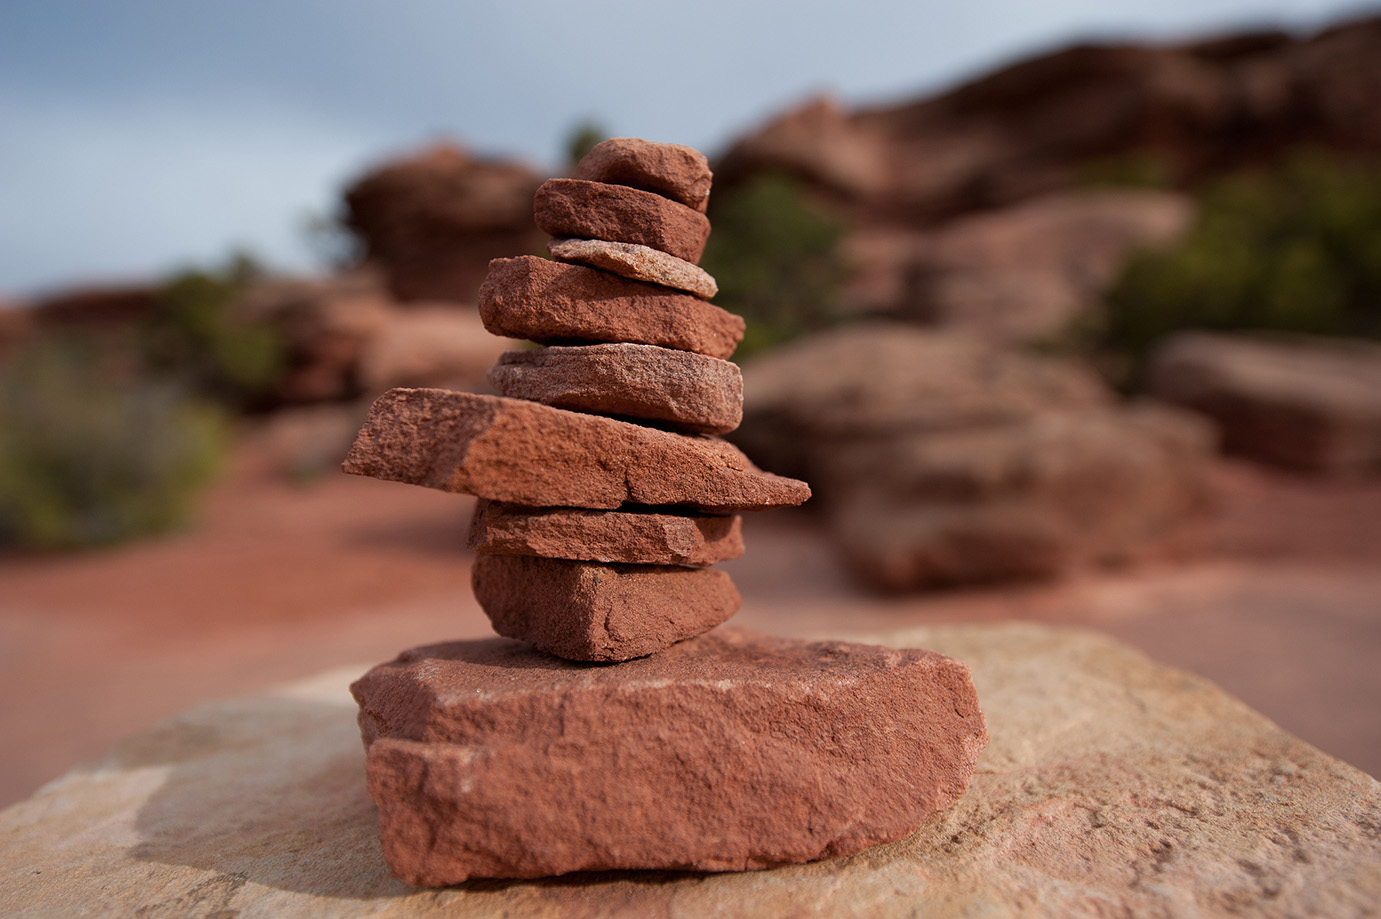 How Stone Stacking Wreaks Havoc on National Parks